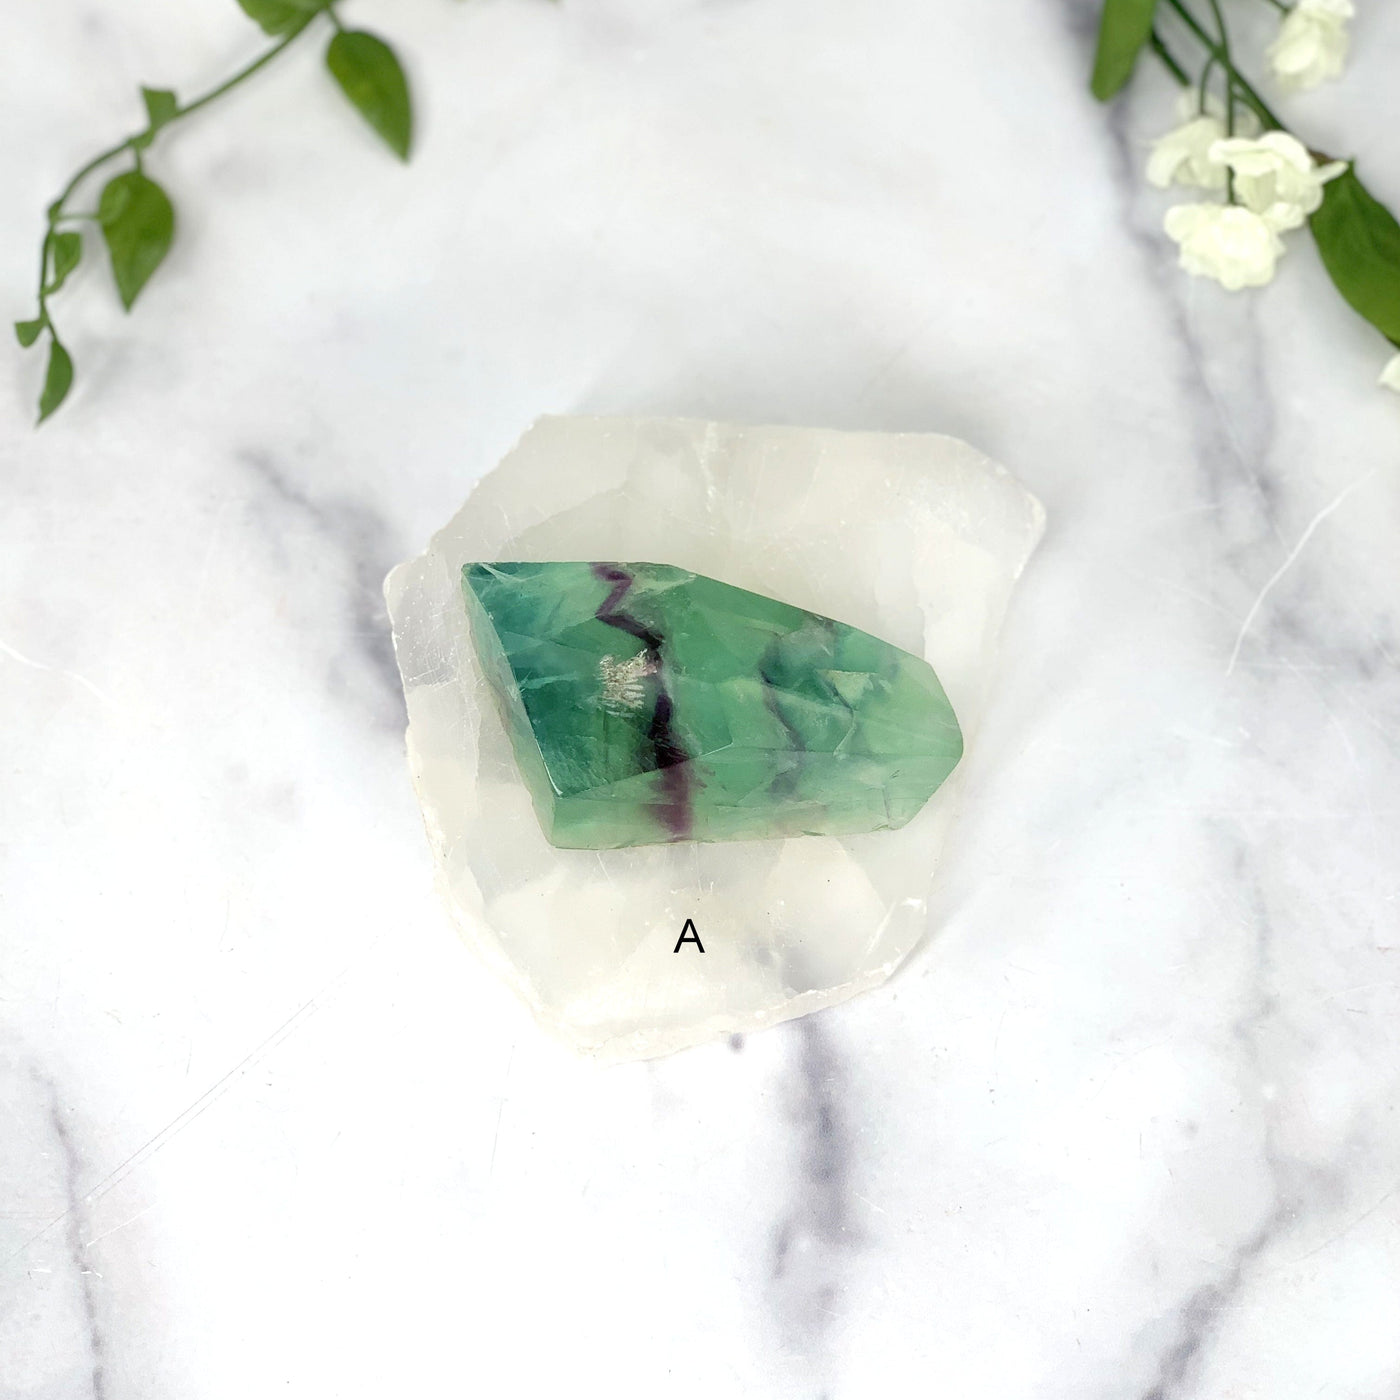 Top angle shot of the Fluorite Chunks (A) on white background